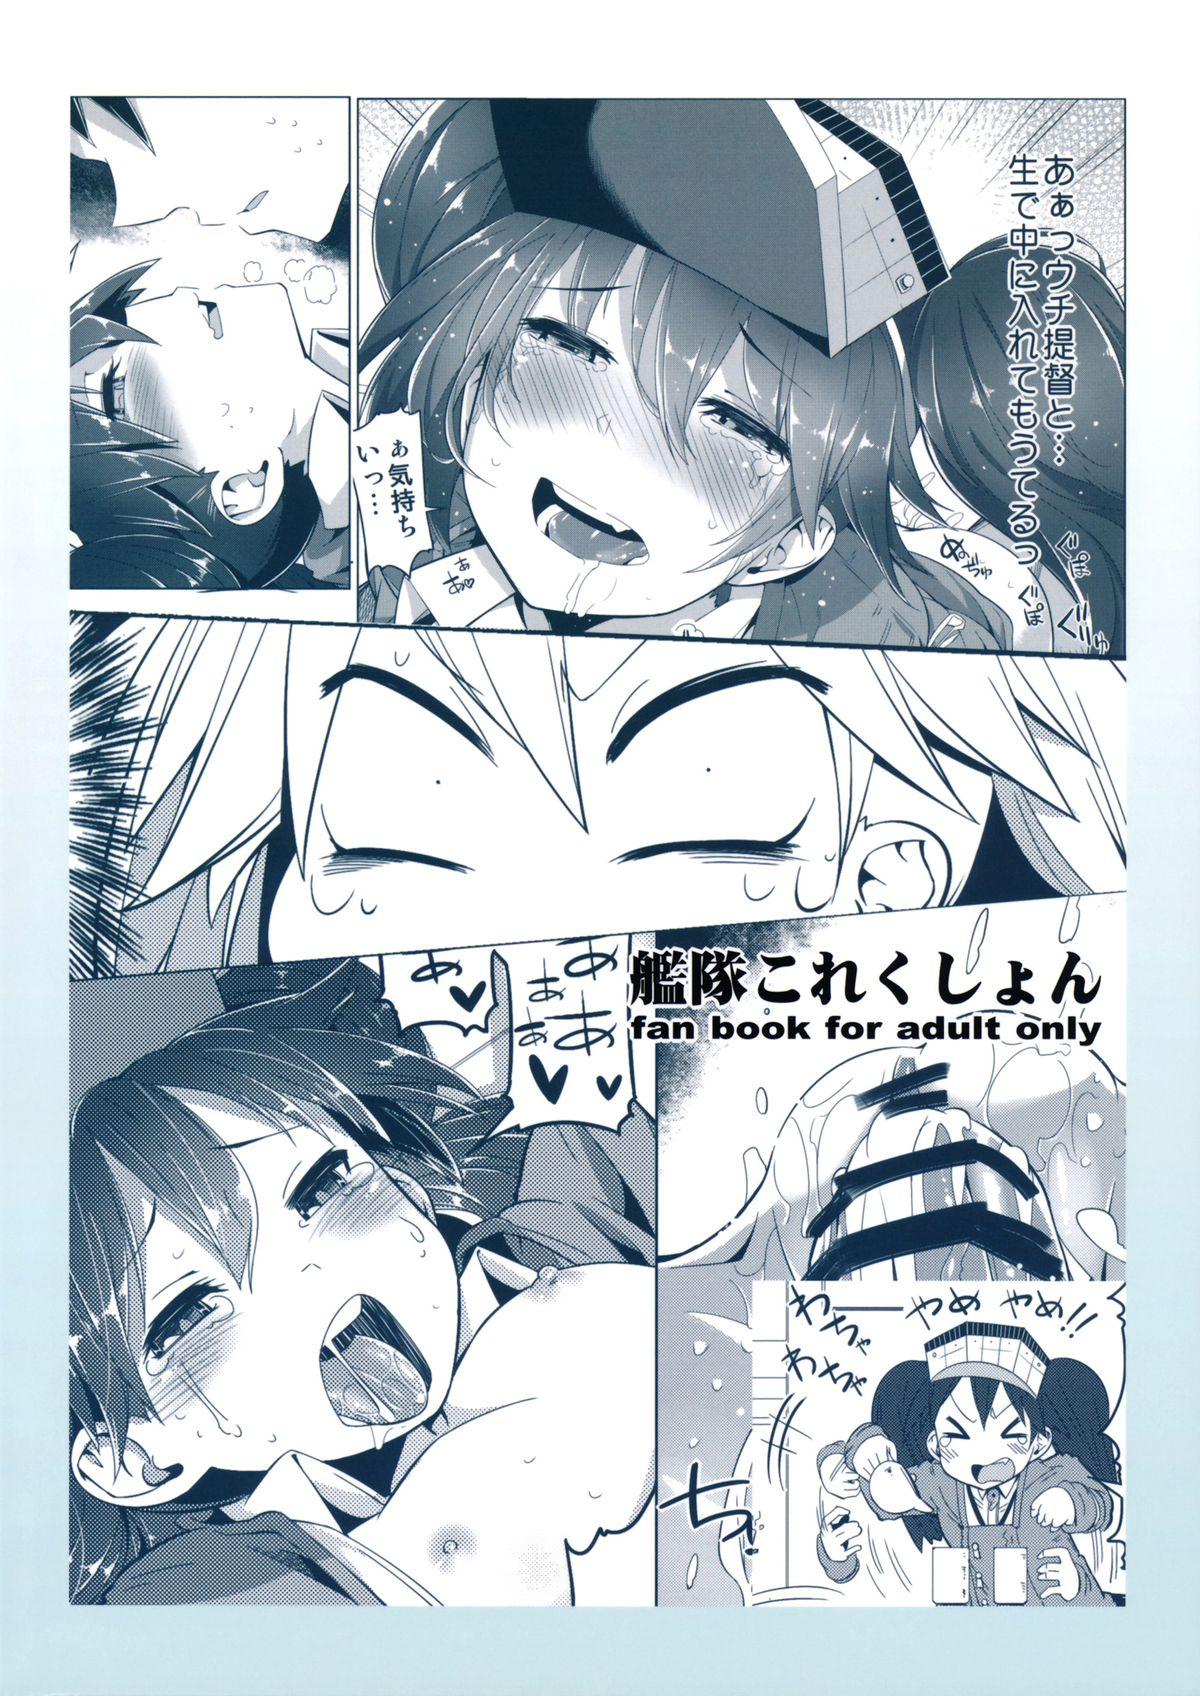 Petite Teen Koi suru Otome no Miryoku wa Mune dake janai! | The Allure of a Maiden in Love isn't Only in Her Chest! - Kantai collection Glory Hole - Page 22